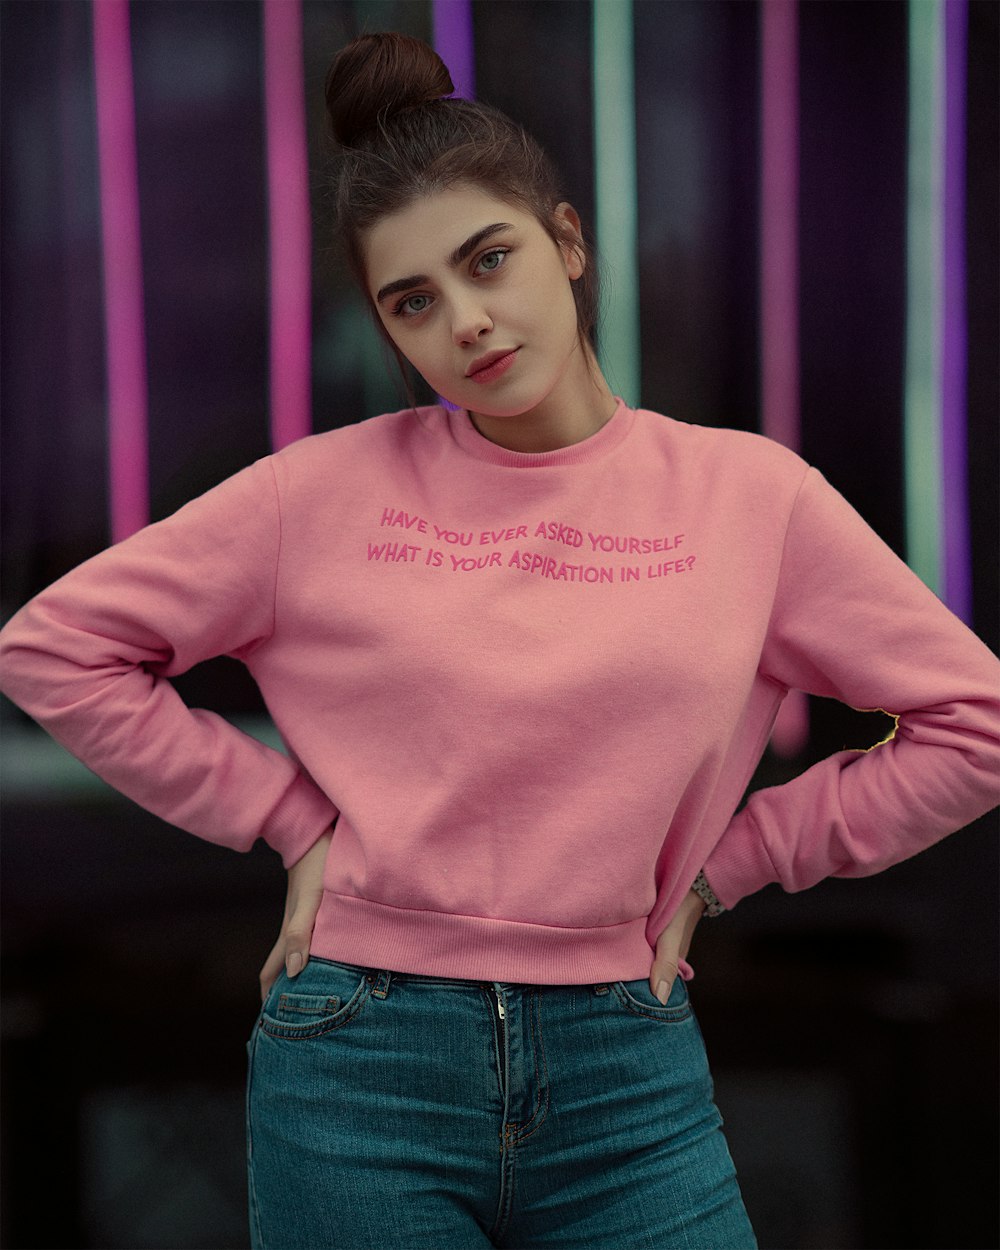 a woman wearing a pink sweatshirt with writing on it